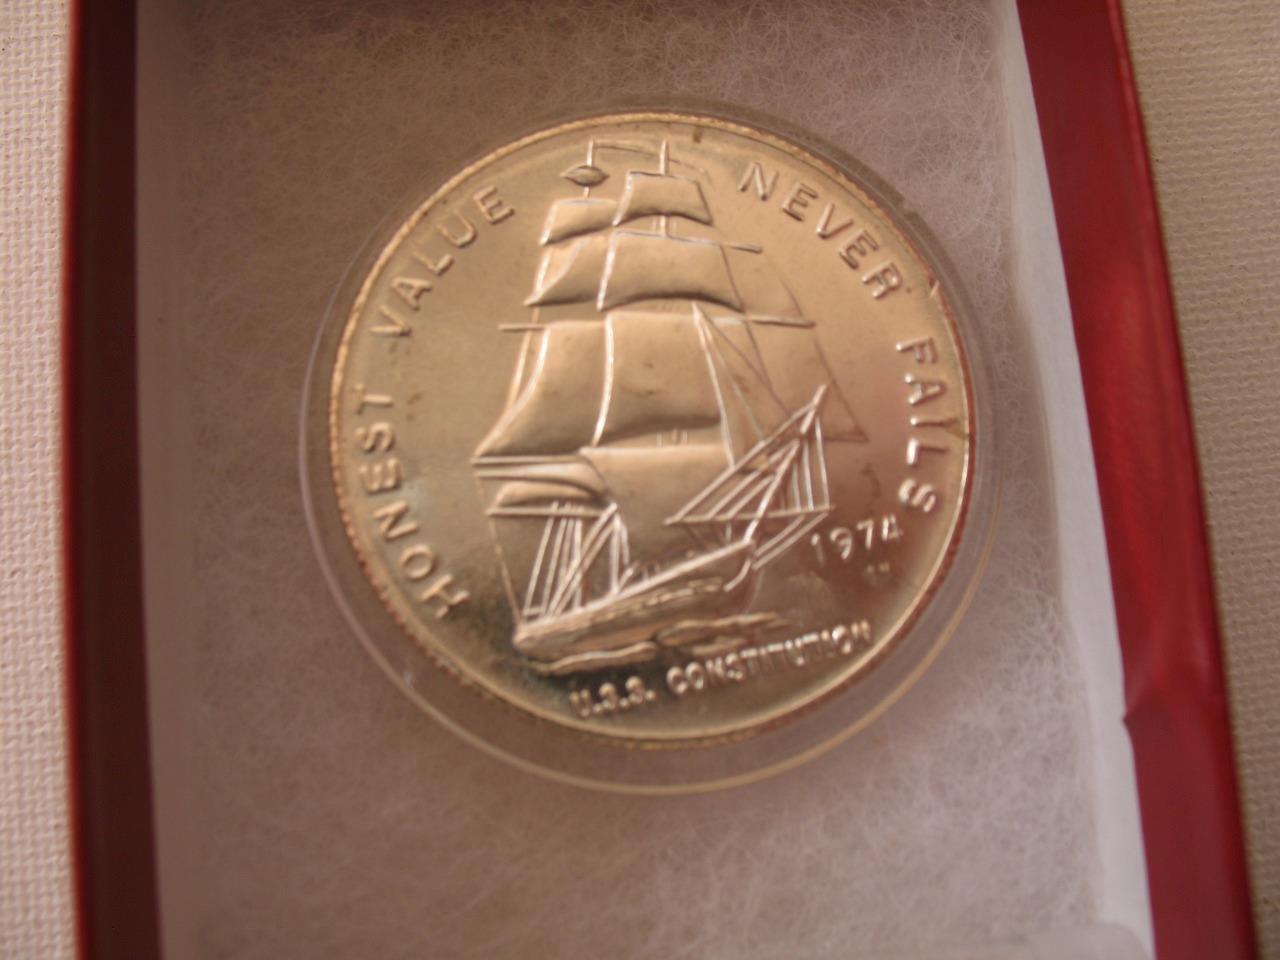 1-OZ.999 USS CONSTITUTION 1974 ART. 1 SEC. 10  SILVER REAL MONEY COIN+GOLD